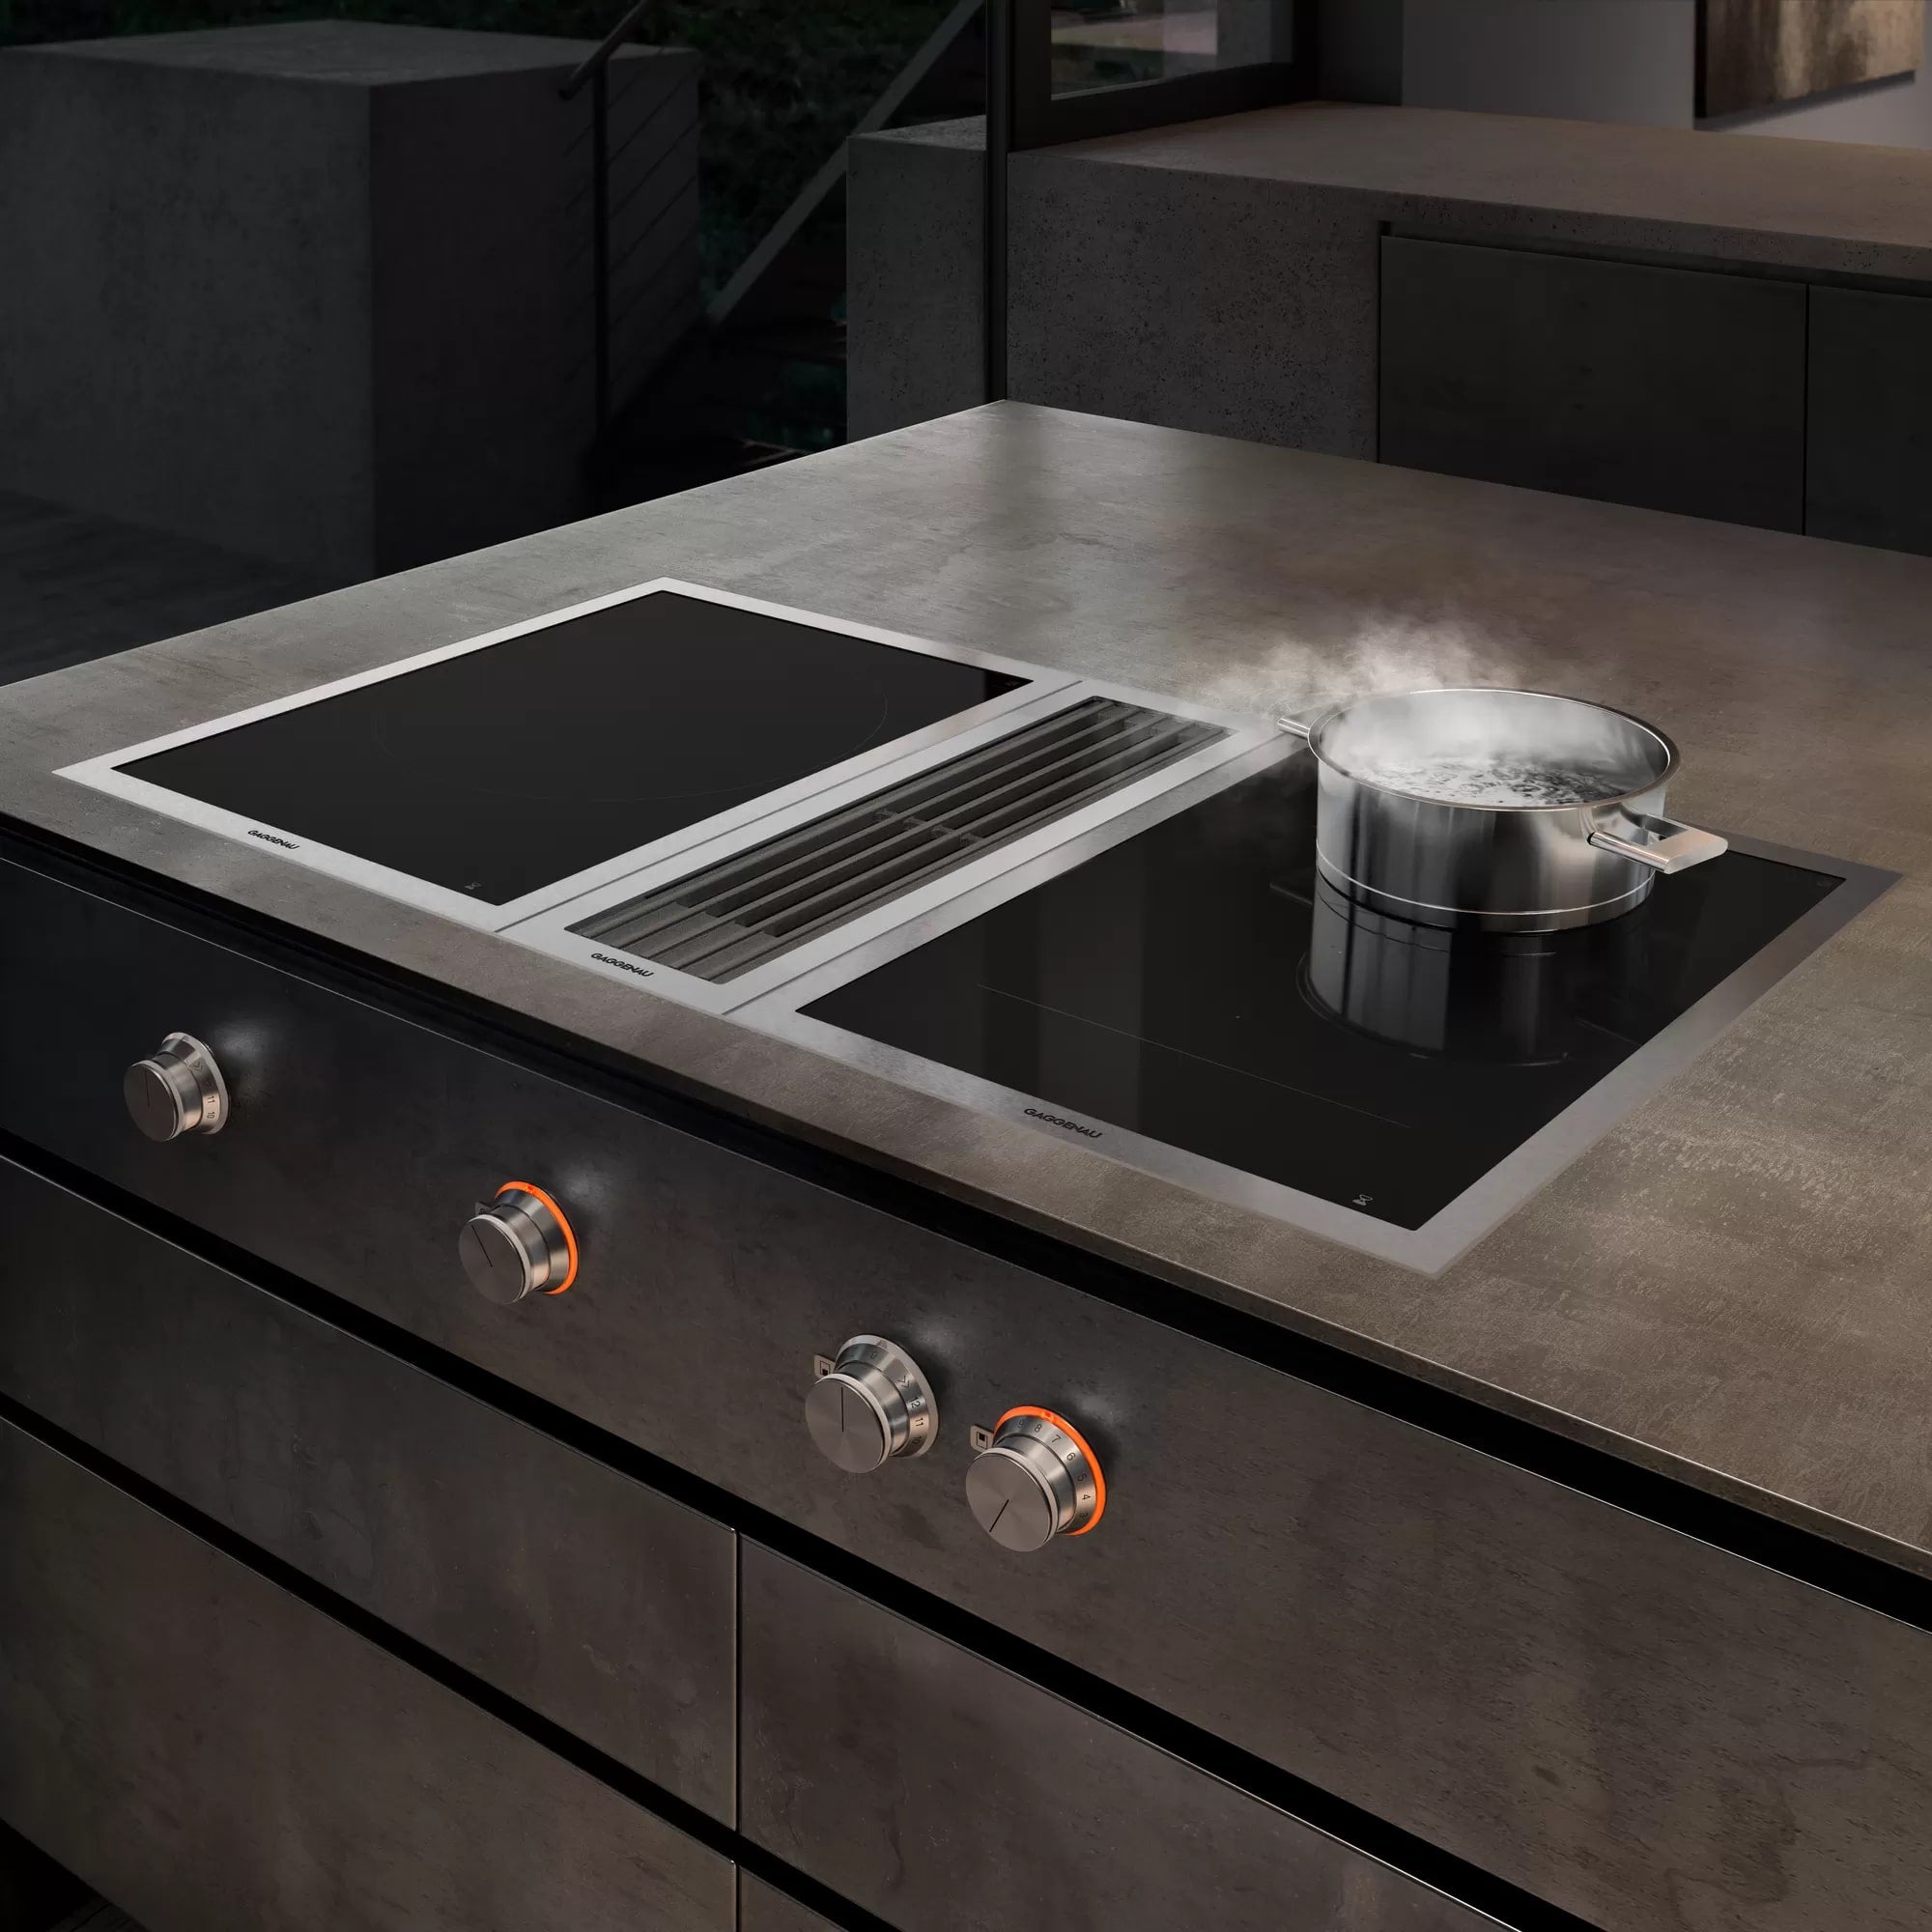 Gaggenau - 6.125 Inch Downdraft Vent in Stainless - VL414712